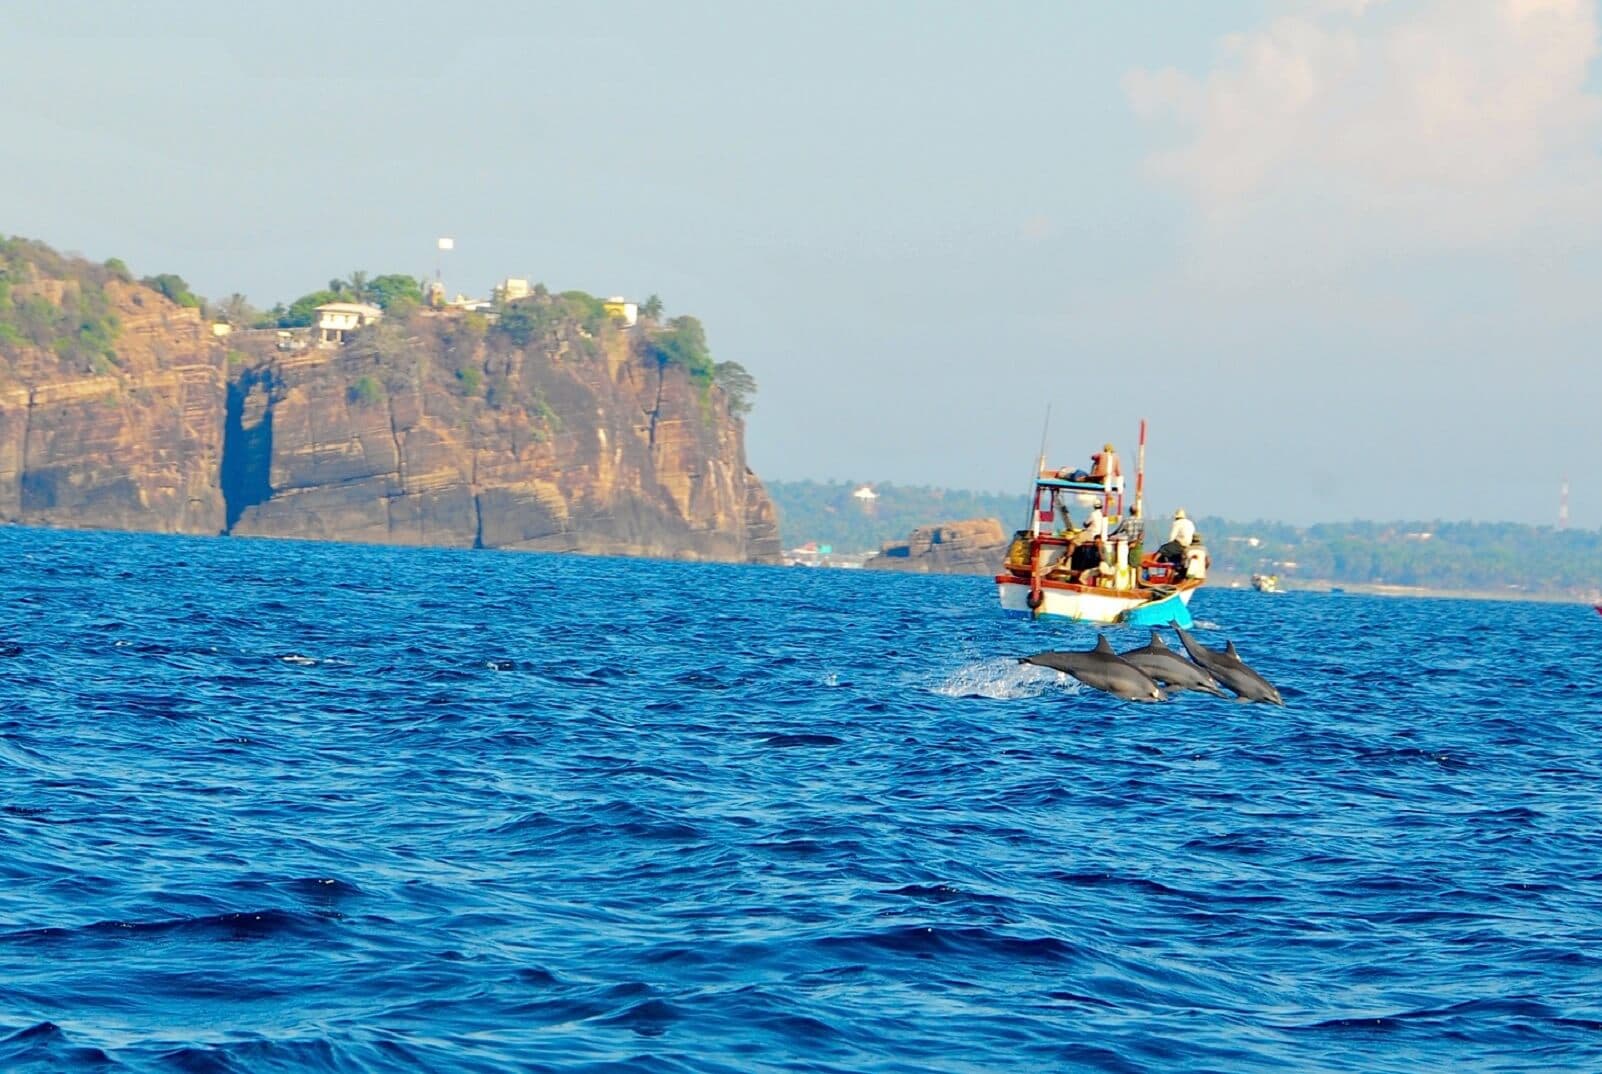 The dolphins swim near the harbour of Trincomalee in Sri Lanka